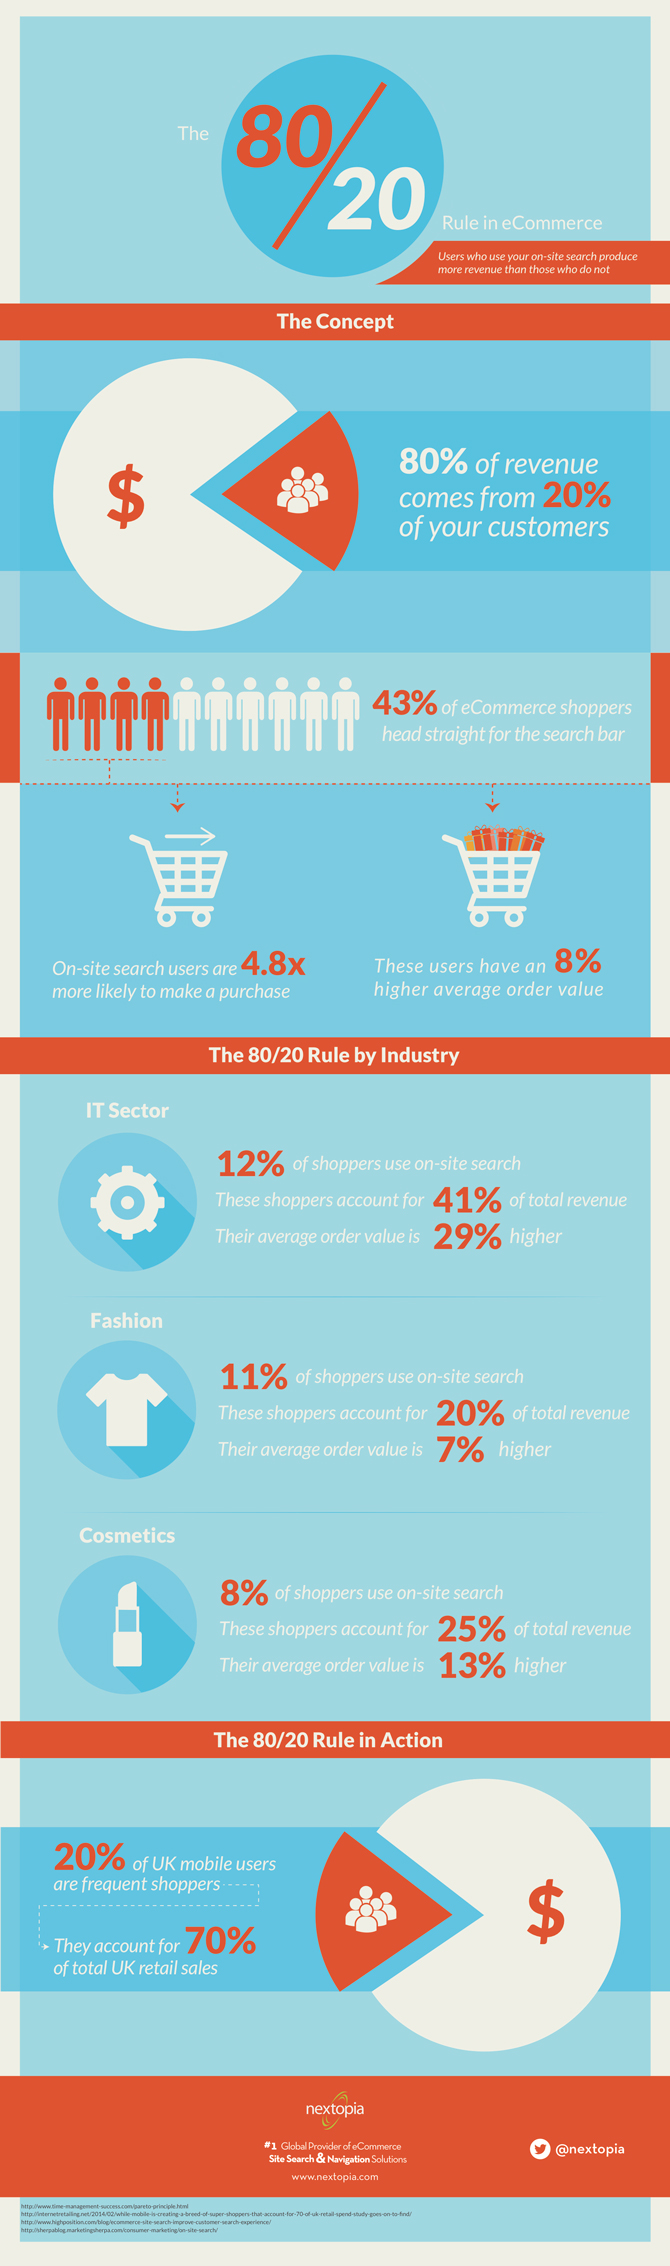 Infographic: The 80/20 Rule